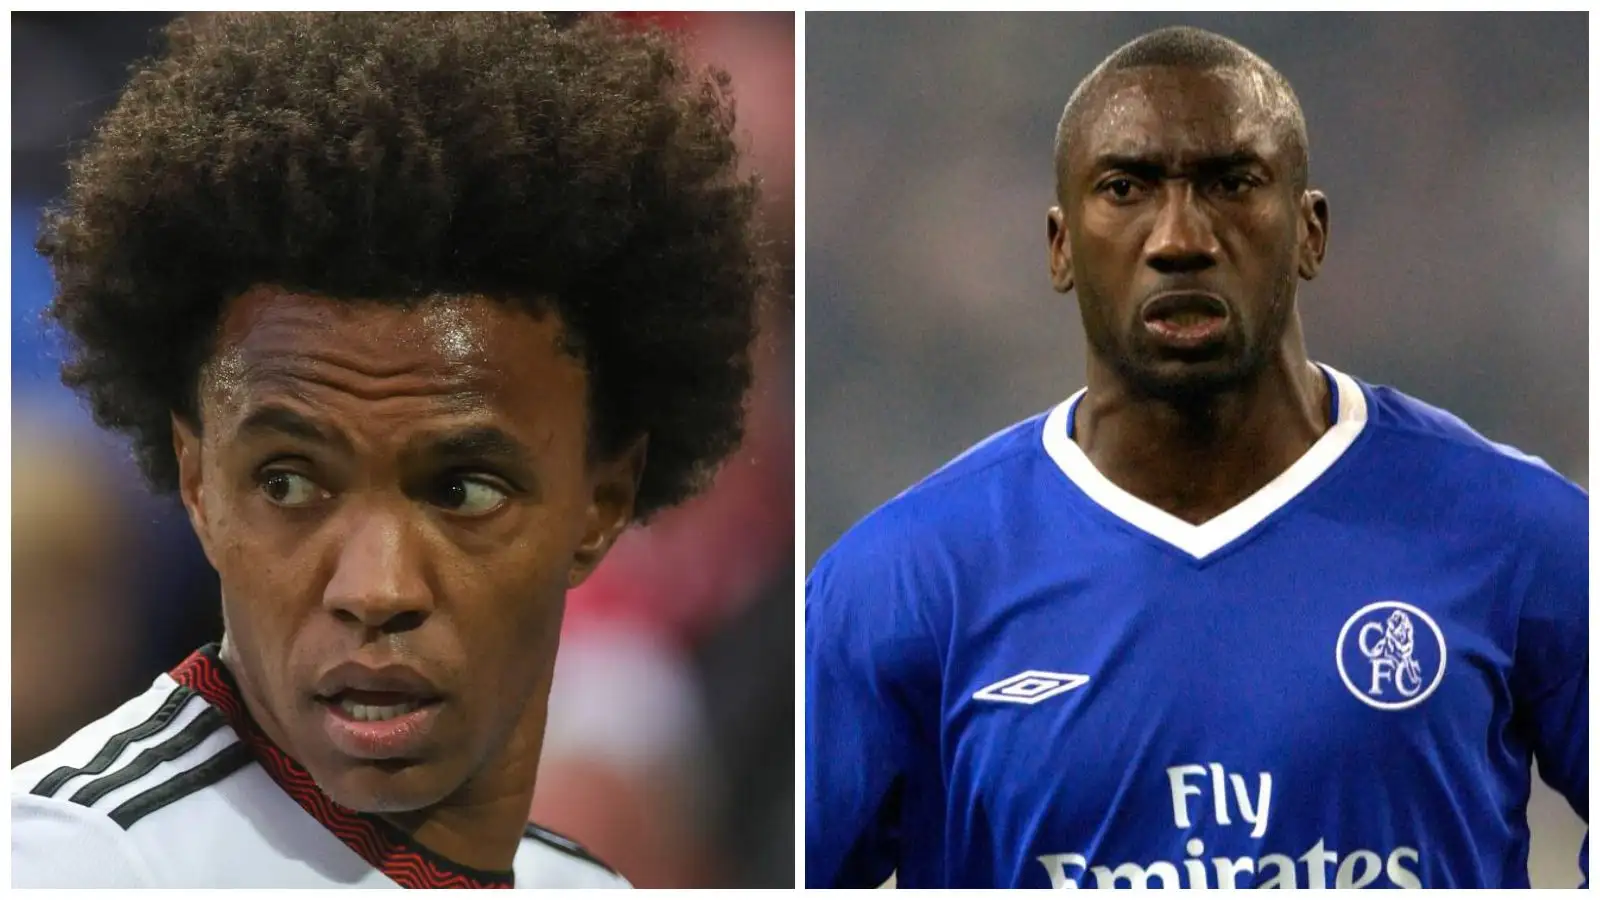 Premier League players Willian and Jimmy Floyd Hasselbaink